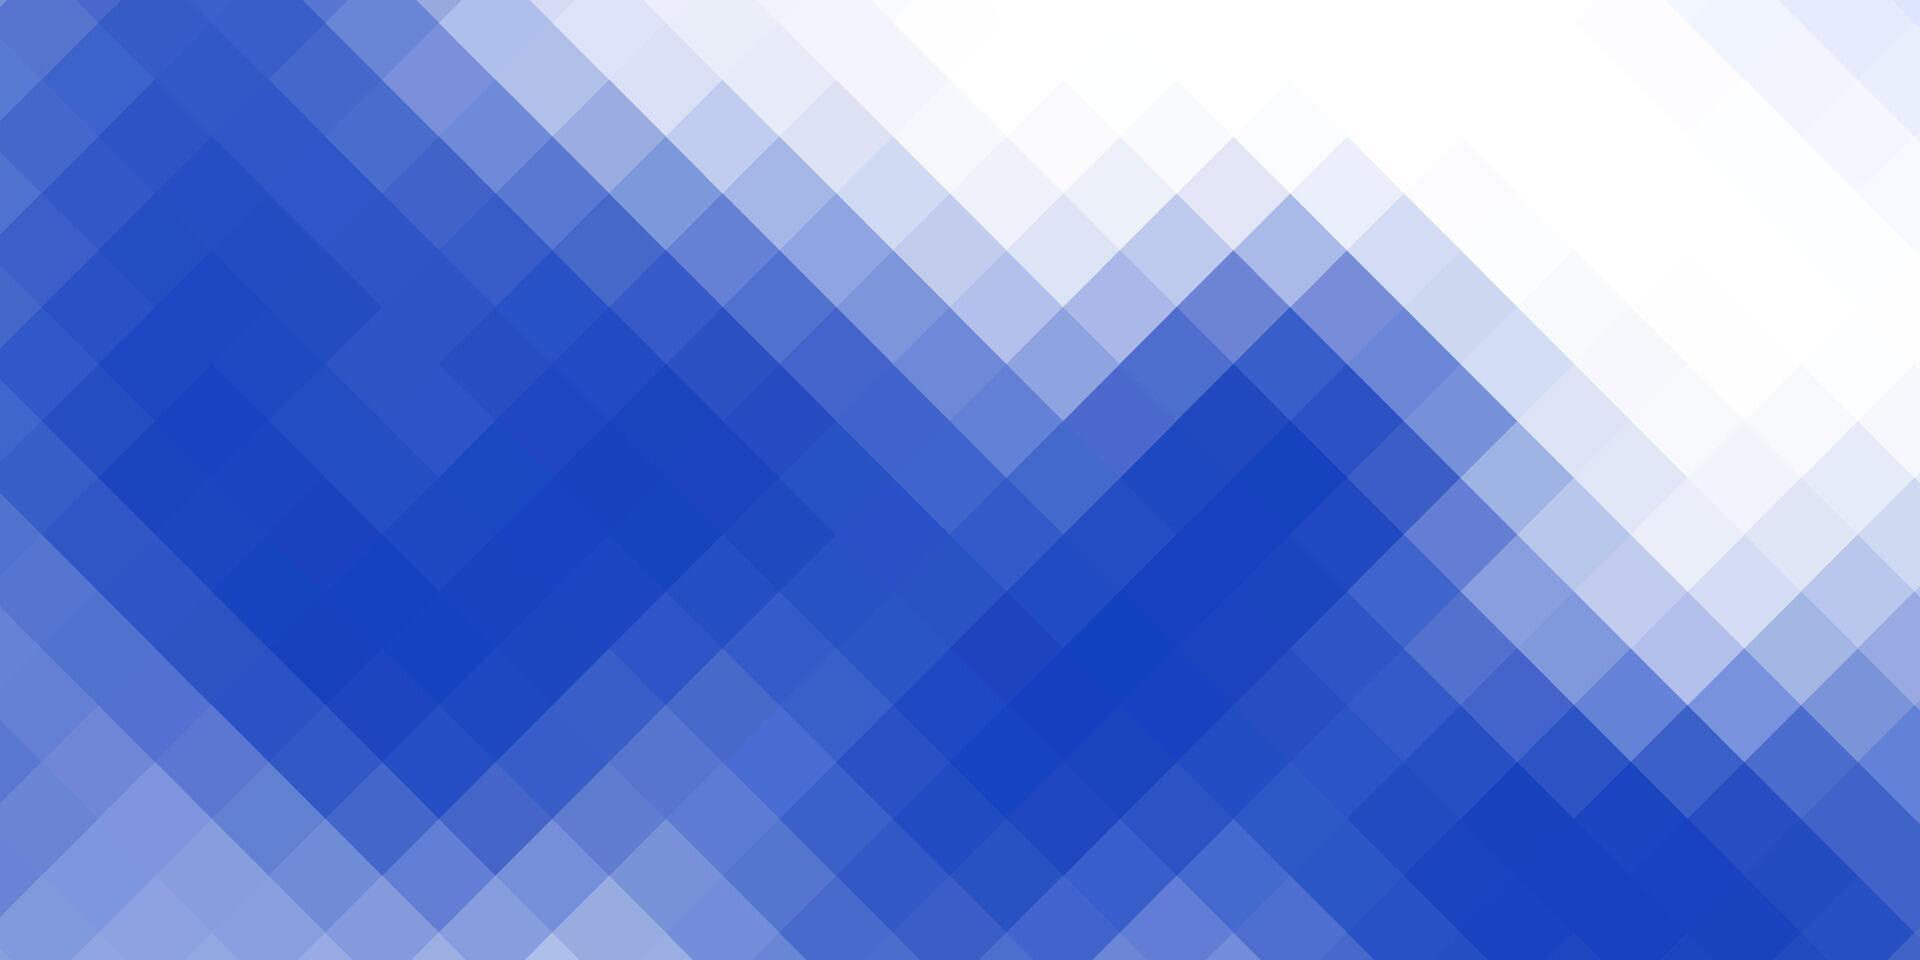 abstract blue and white pixelation background vector